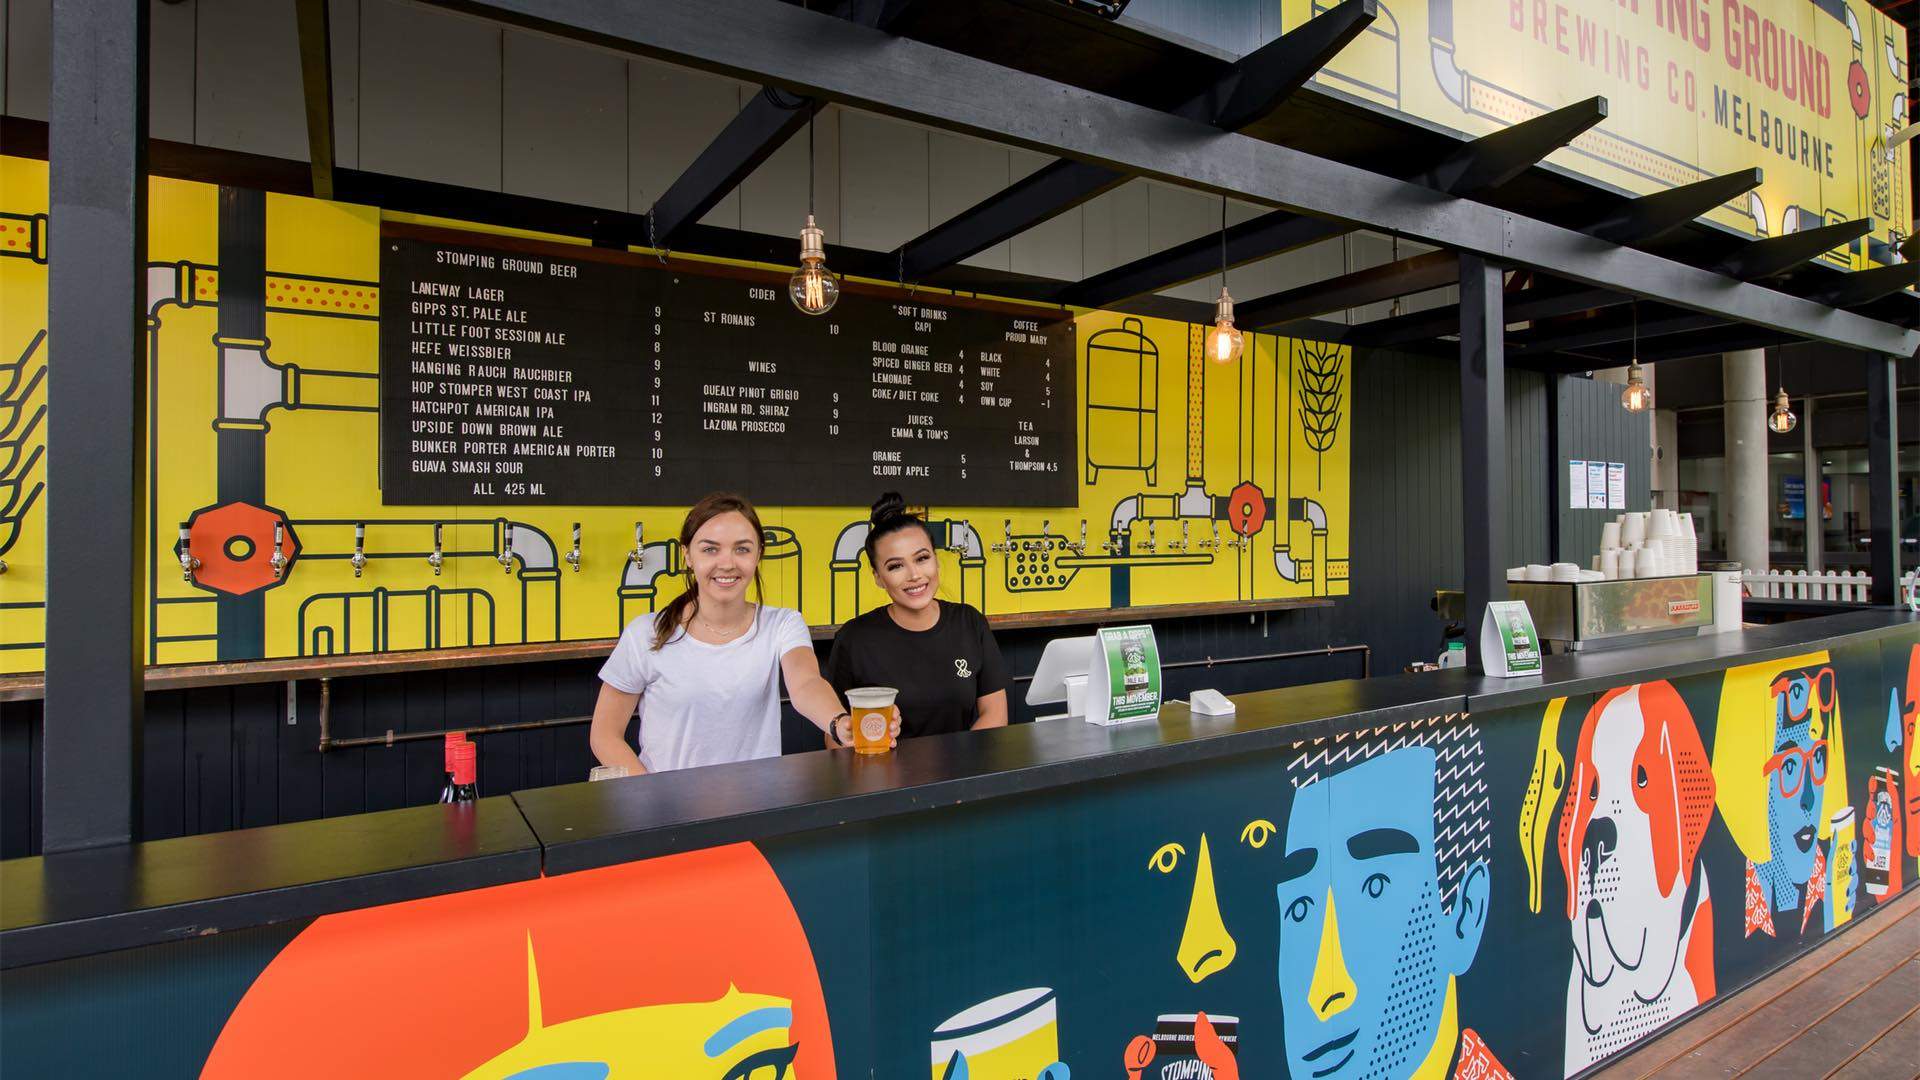 Stomping Ground Has Opened a Pop-Up Beer Garden at Melbourne Airport